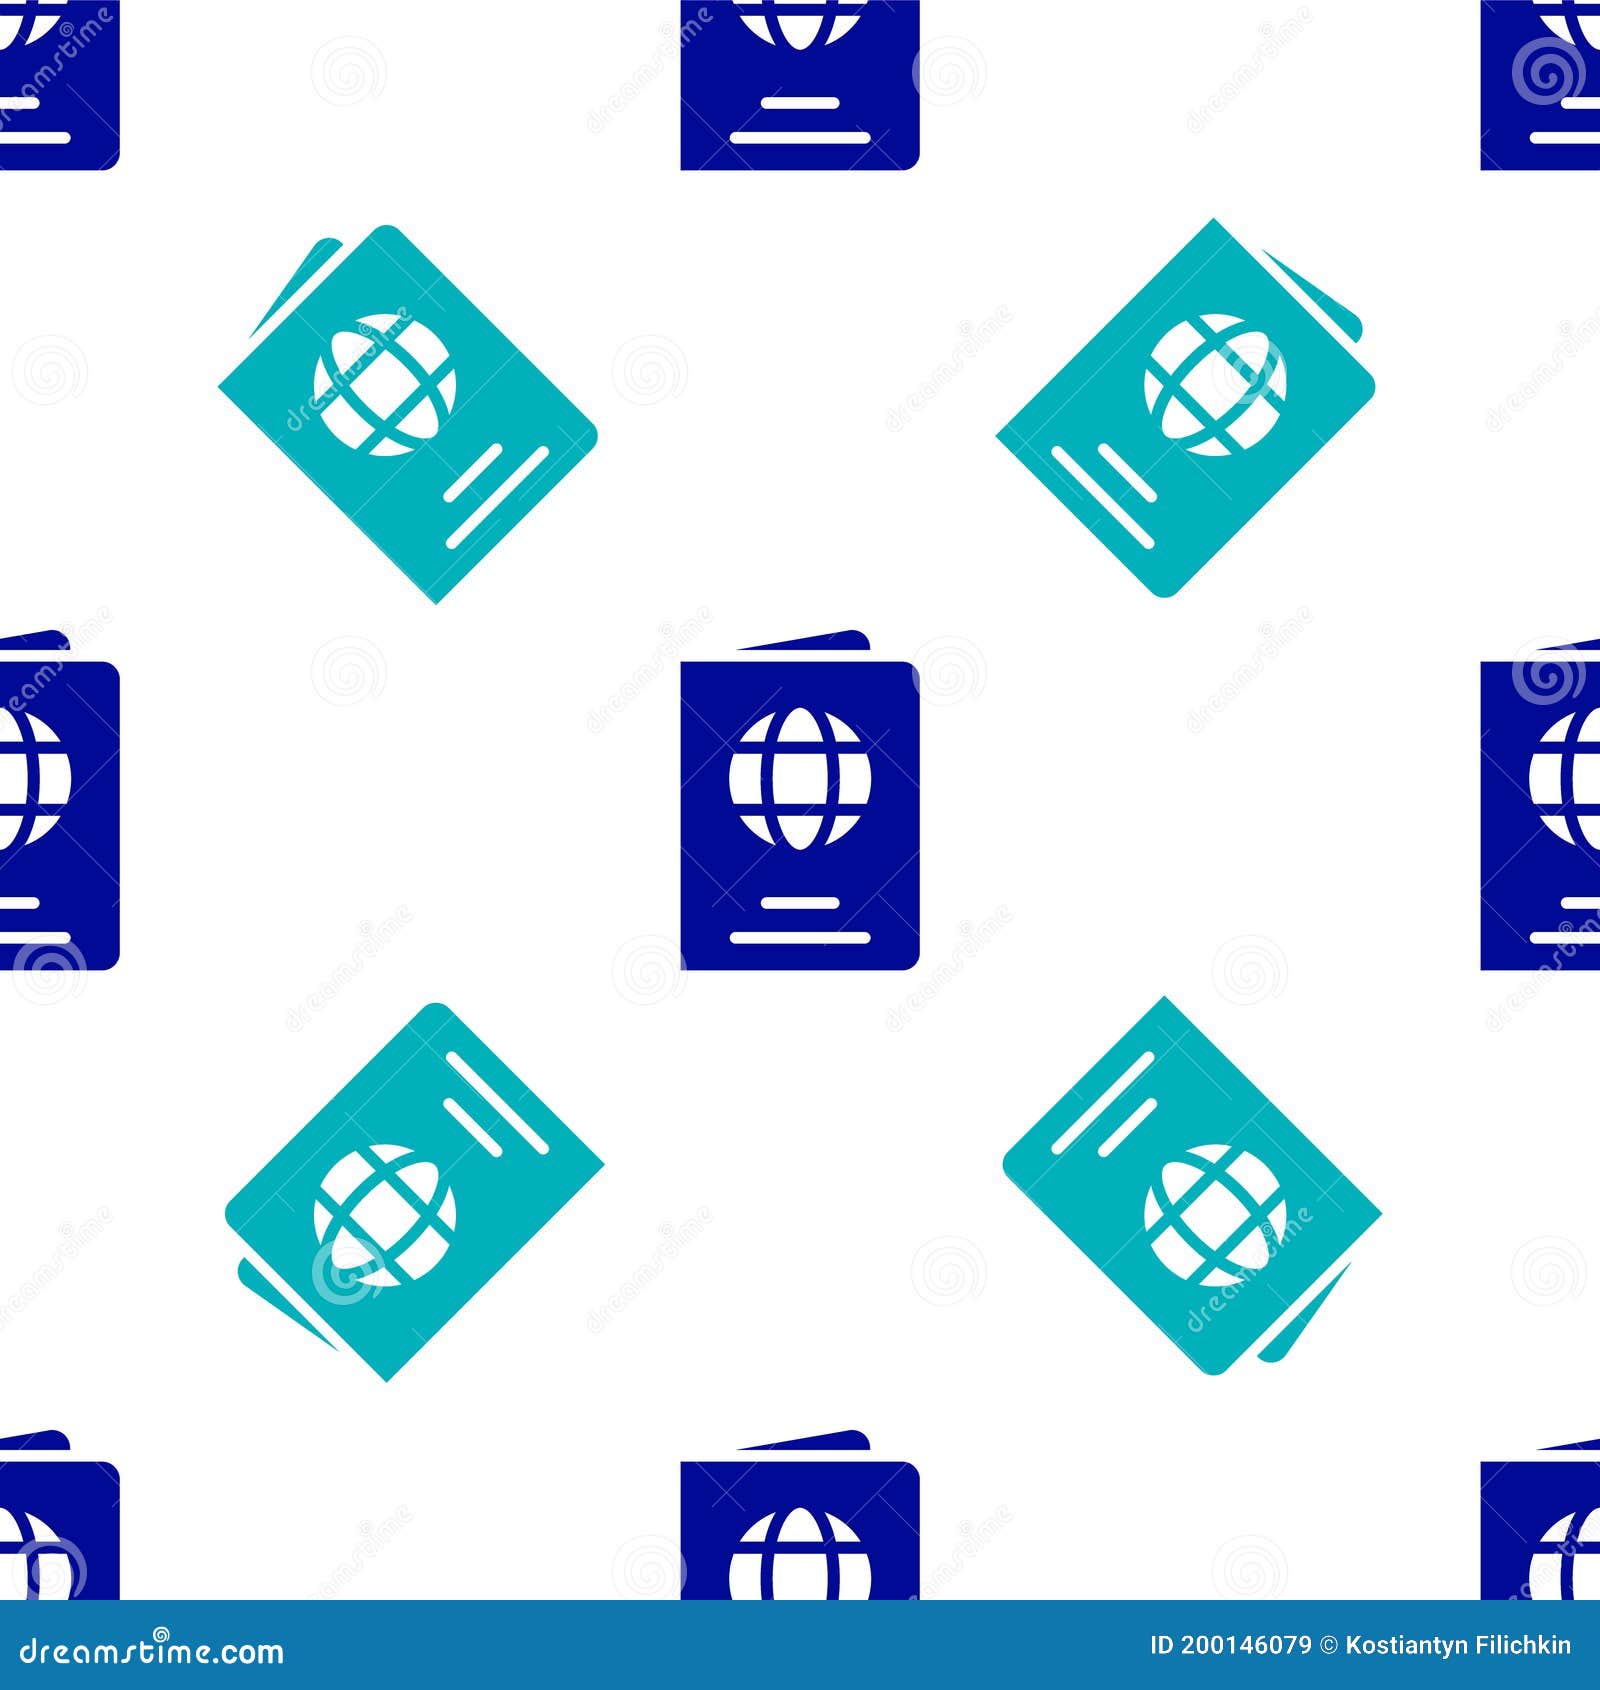 Blue Passport With Biometric Data Icon Isolated Seamless Pattern On White Background Identification Document Vector Stock Vector Illustration Of Paper Cover 200146079